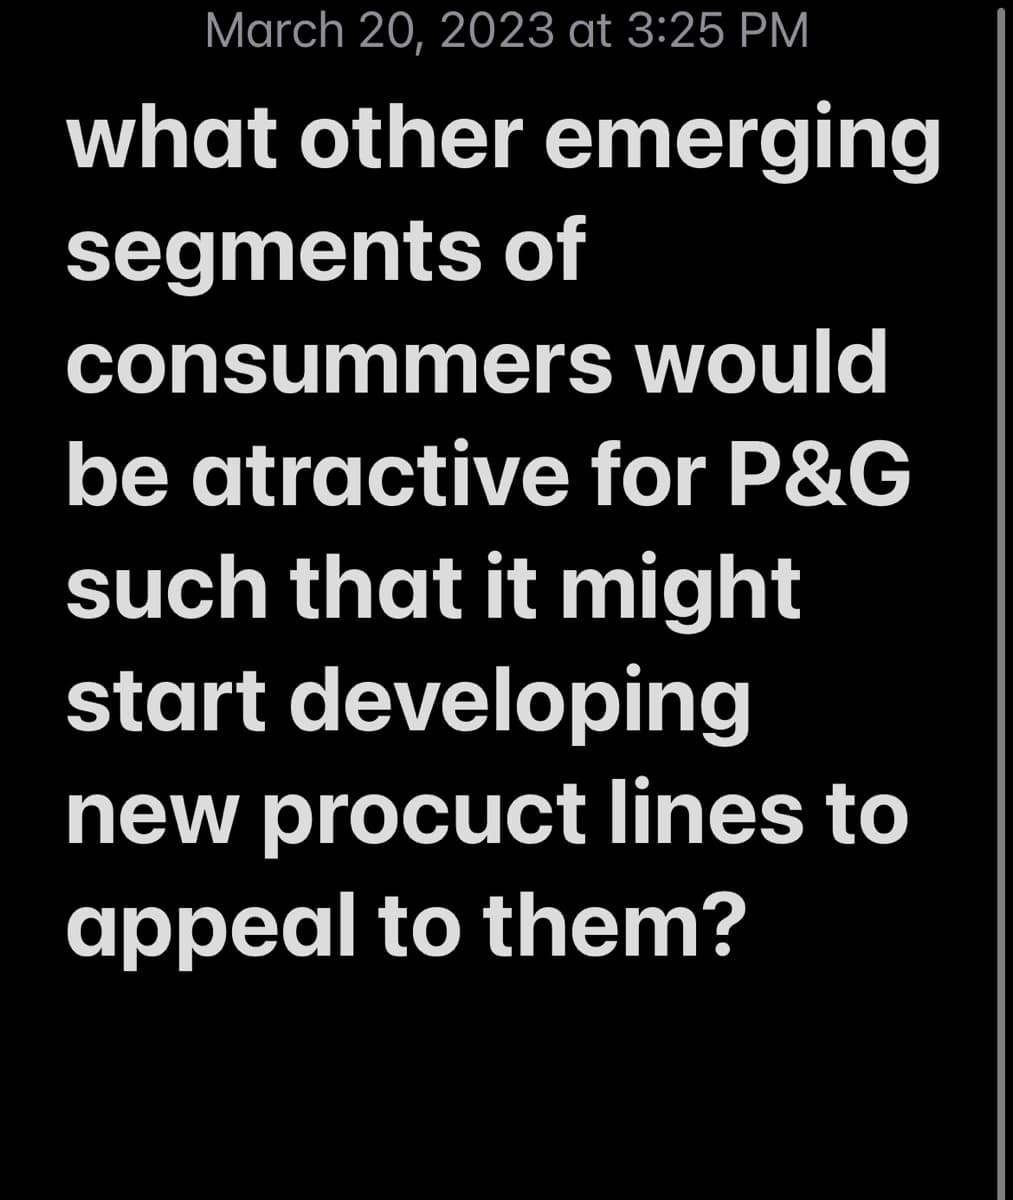 March 20, 2023 at 3:25 PM
what other emerging
segments of
consummers would
be atractive for P&G
such that it might
start developing
new procuct lines to
appeal to them?